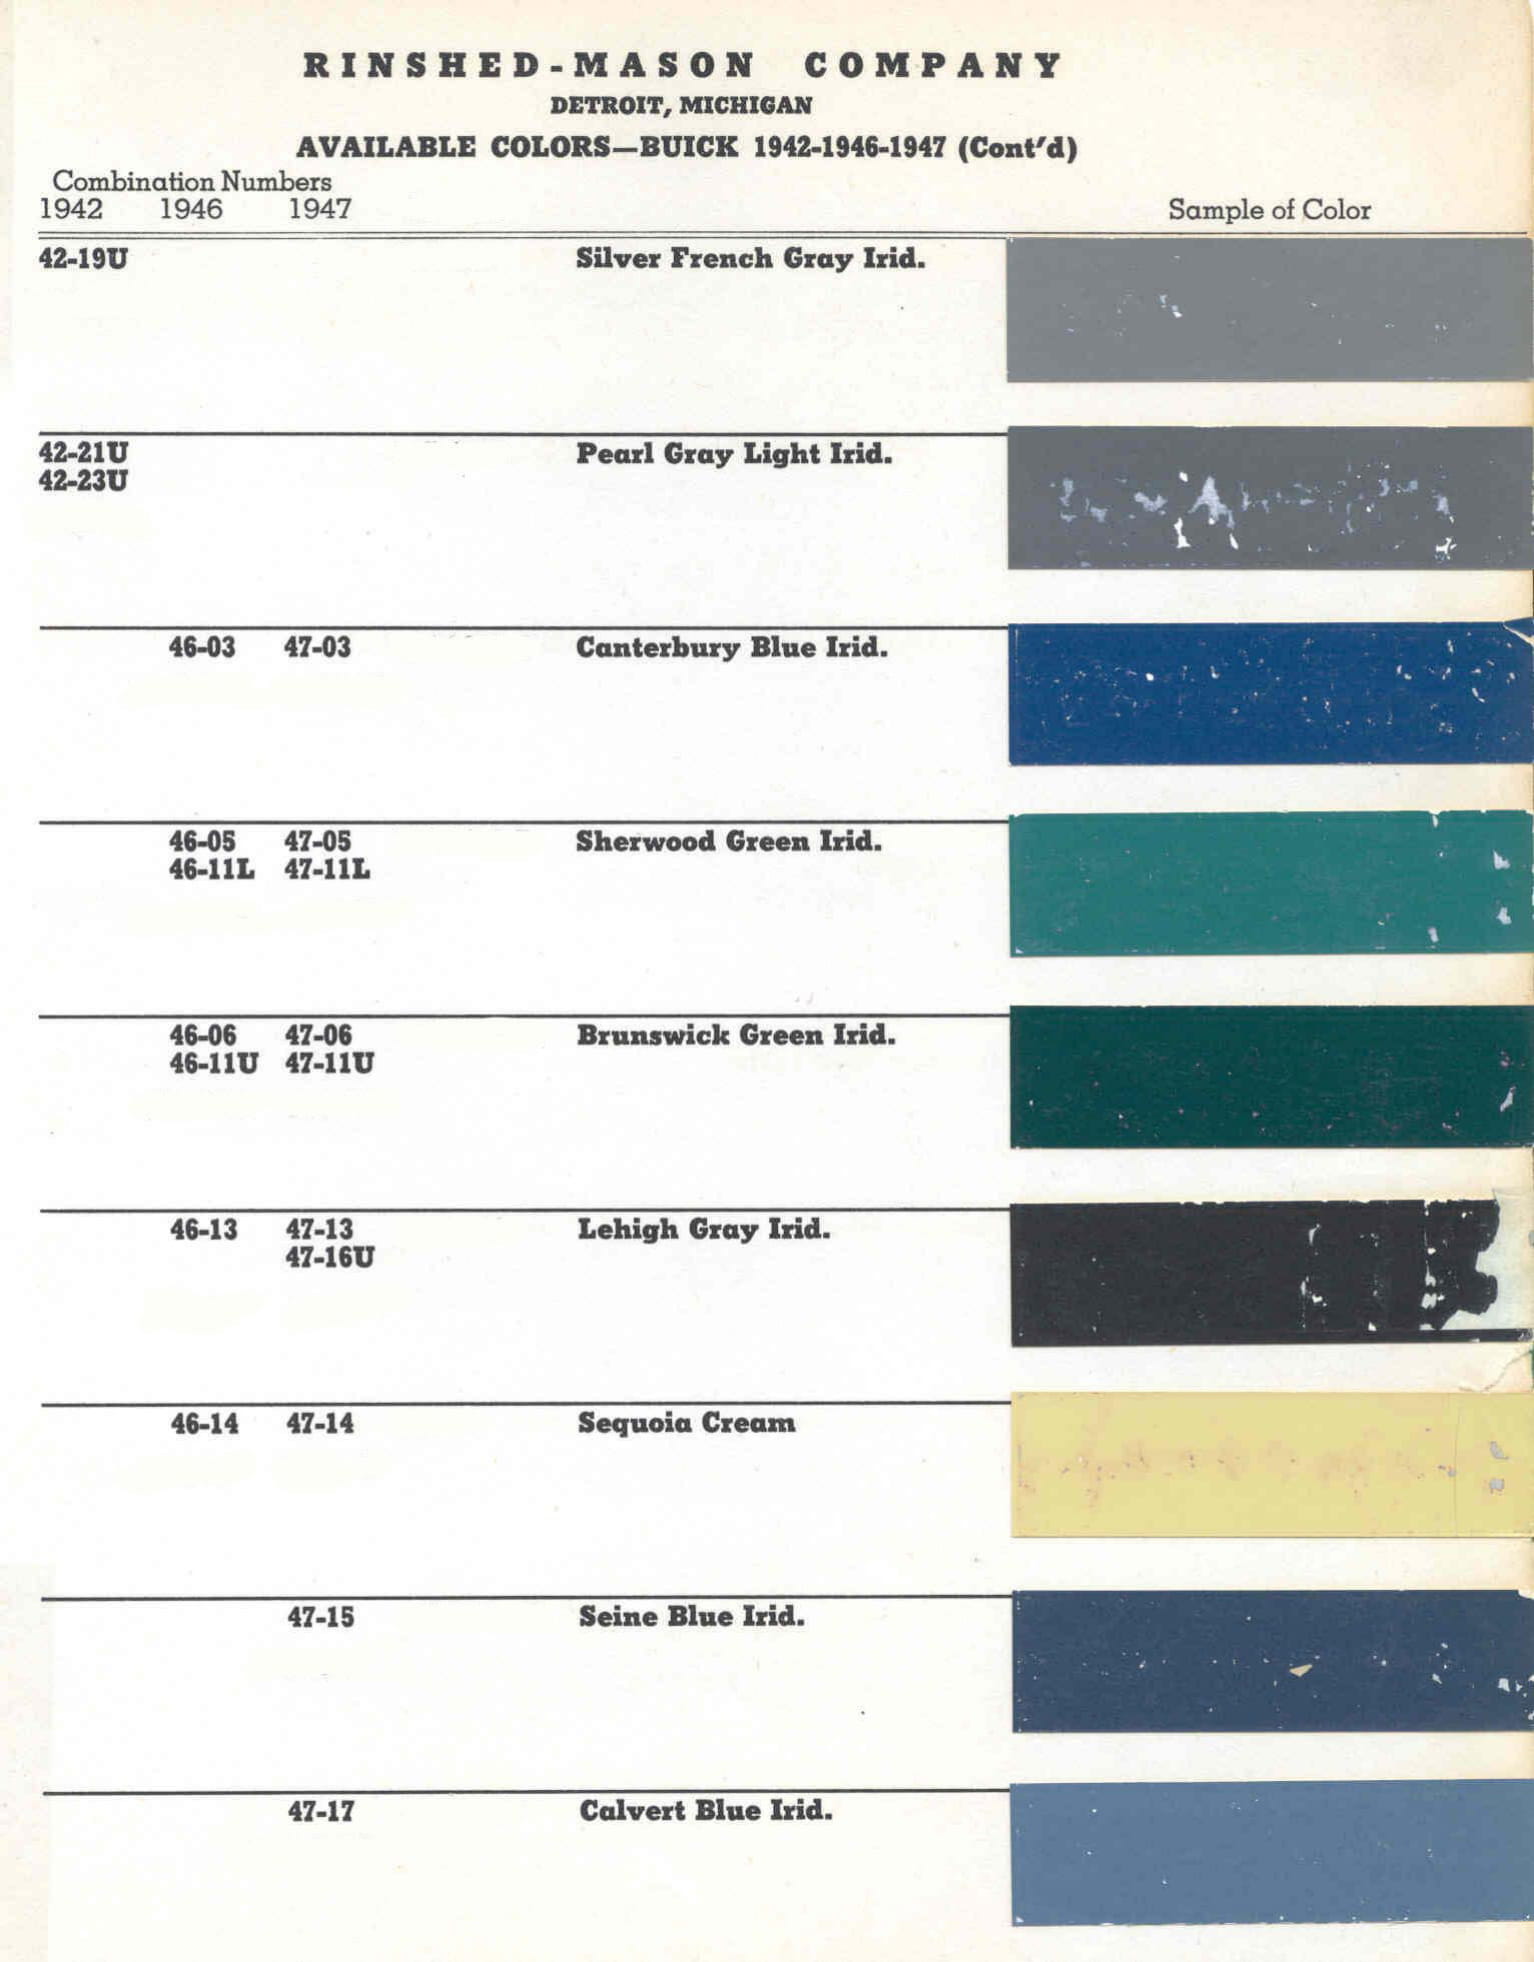 Color Examples and their codes for Buick Vehicles